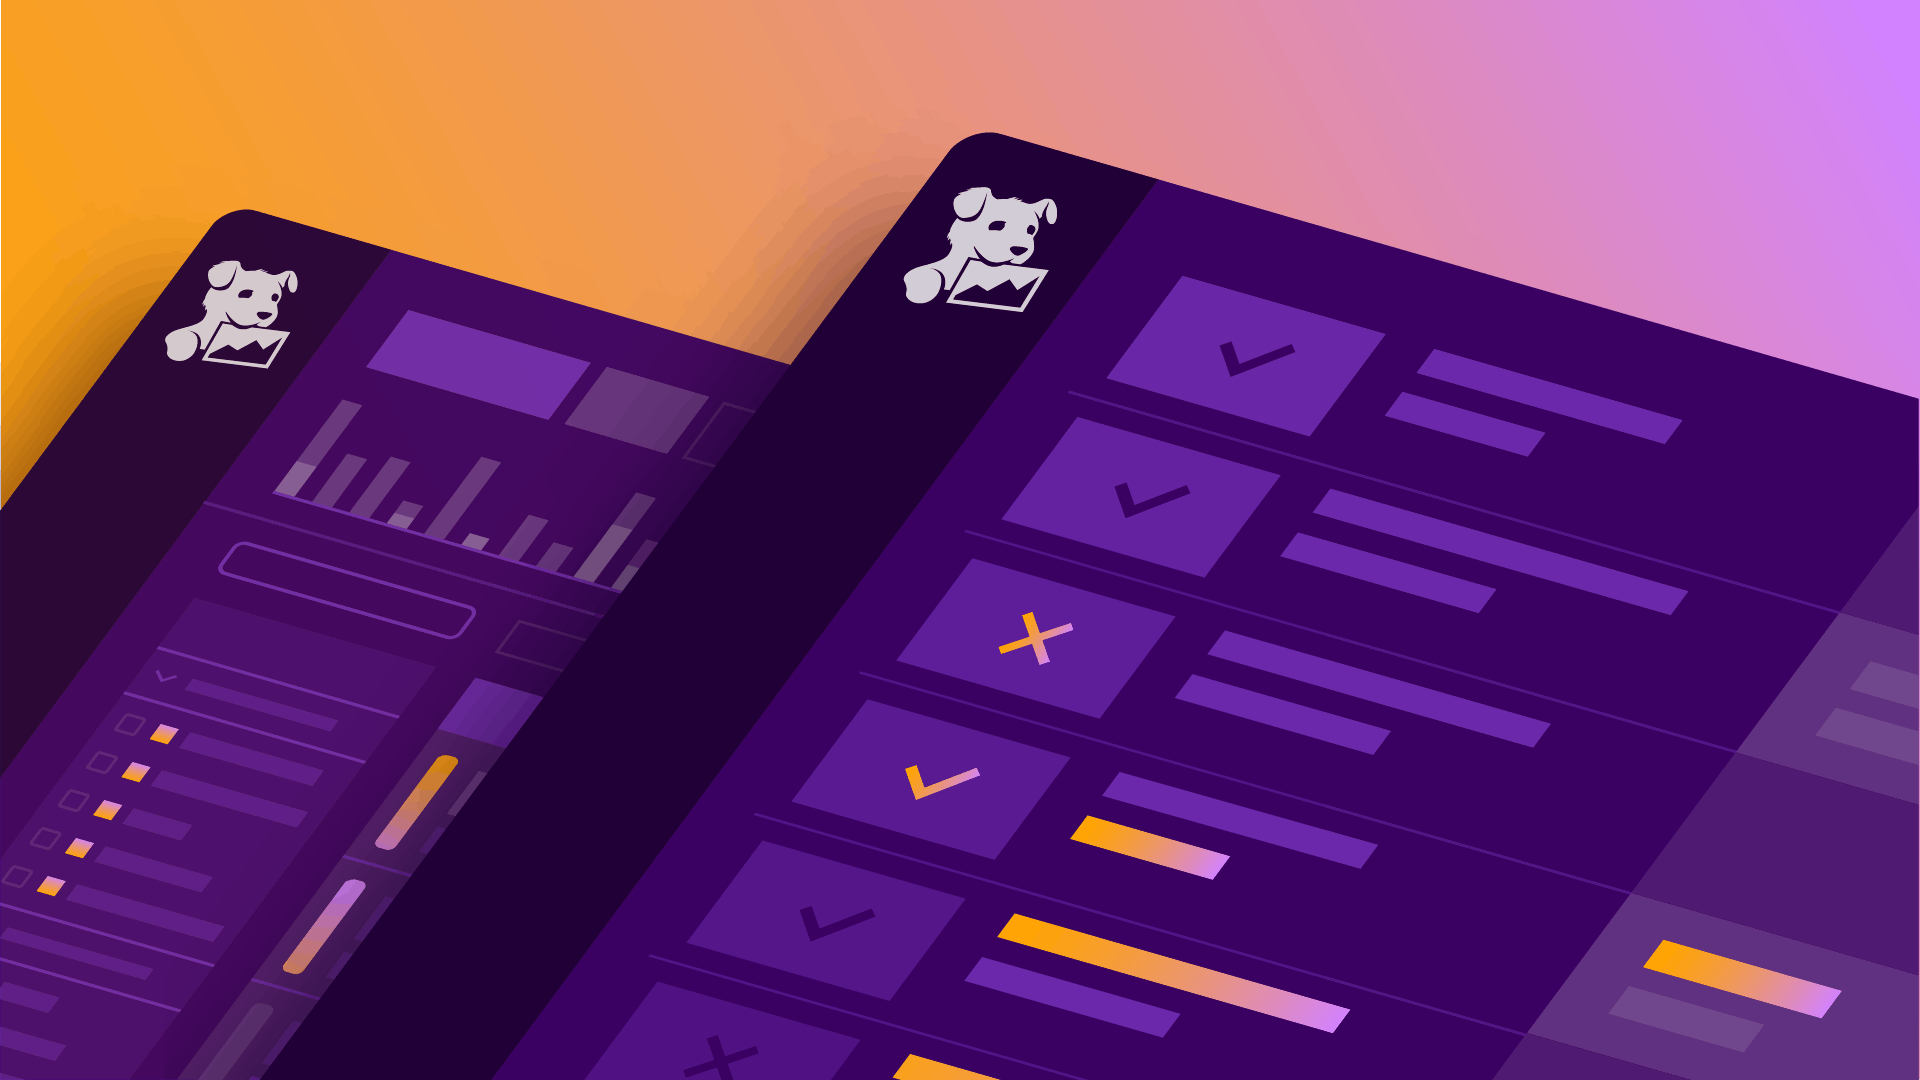 A higly detailed animated illustration, depicting simplified representations of dashboards within the Datadog app in purple and orange hues.